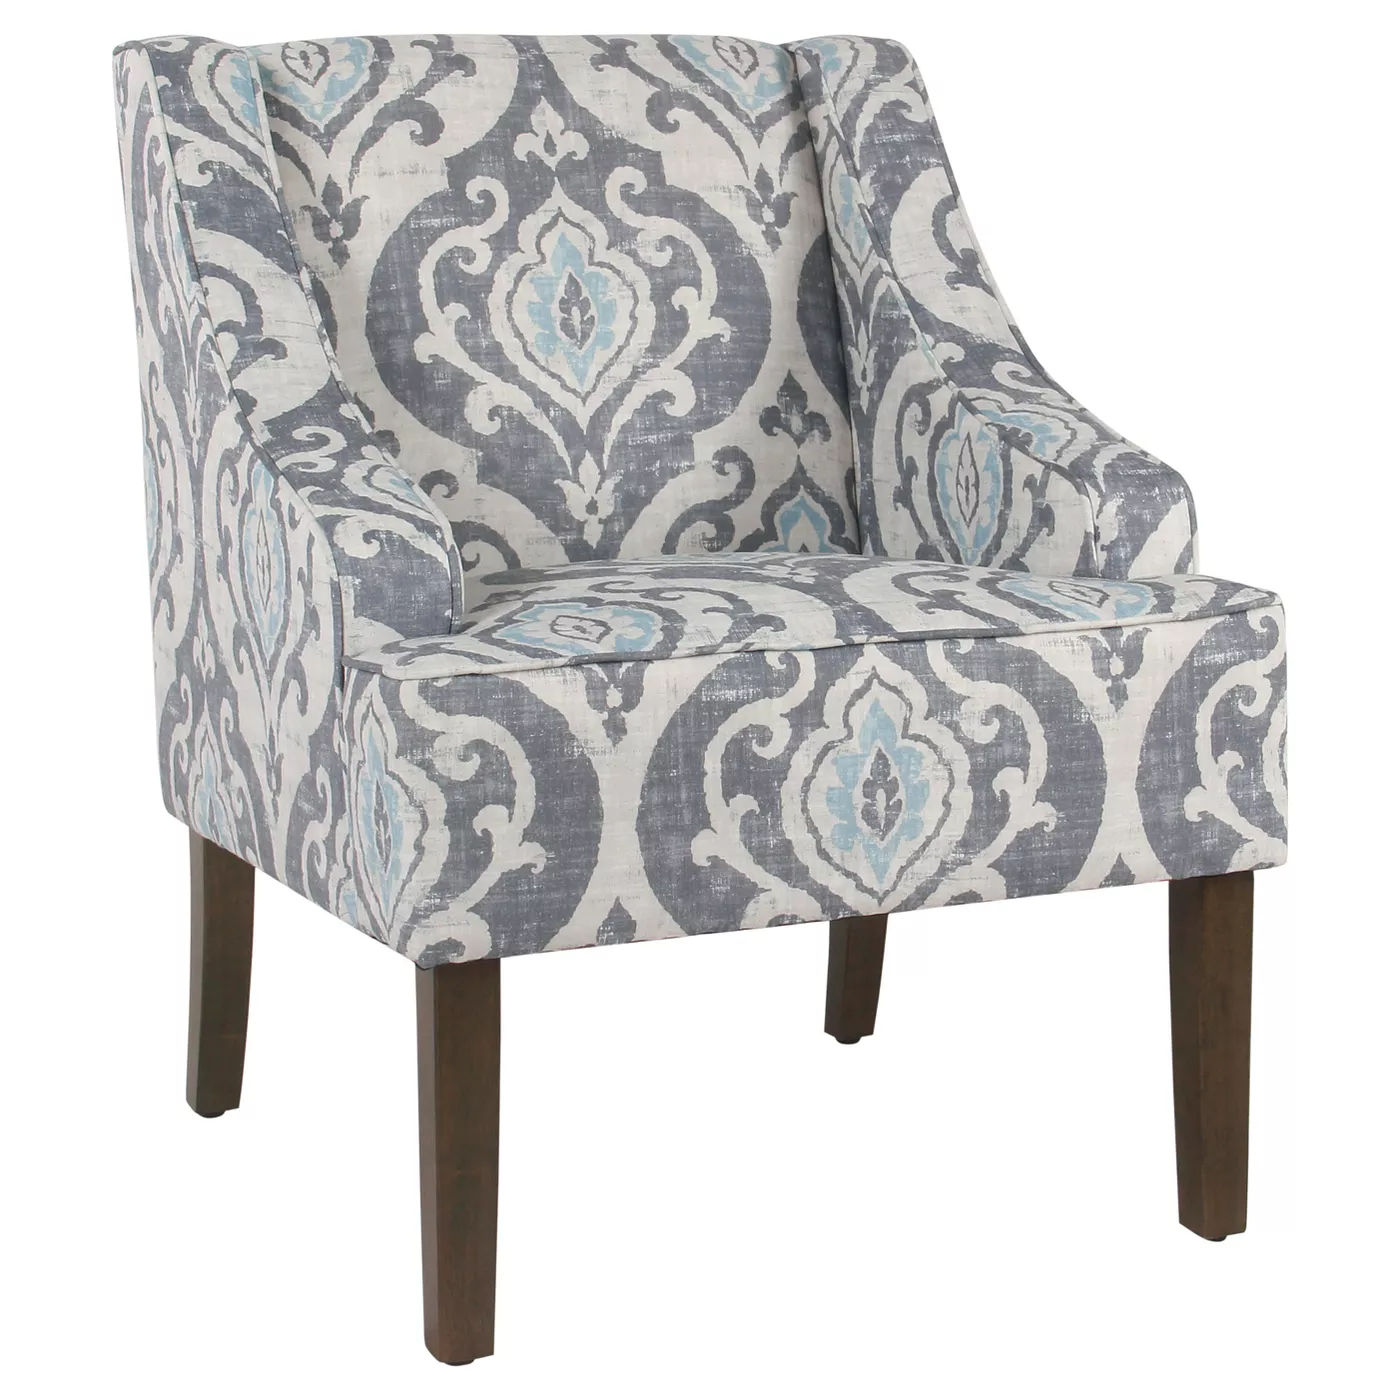 Finley Swoop Arm Accent Chair - HomePop - image 1 of 9